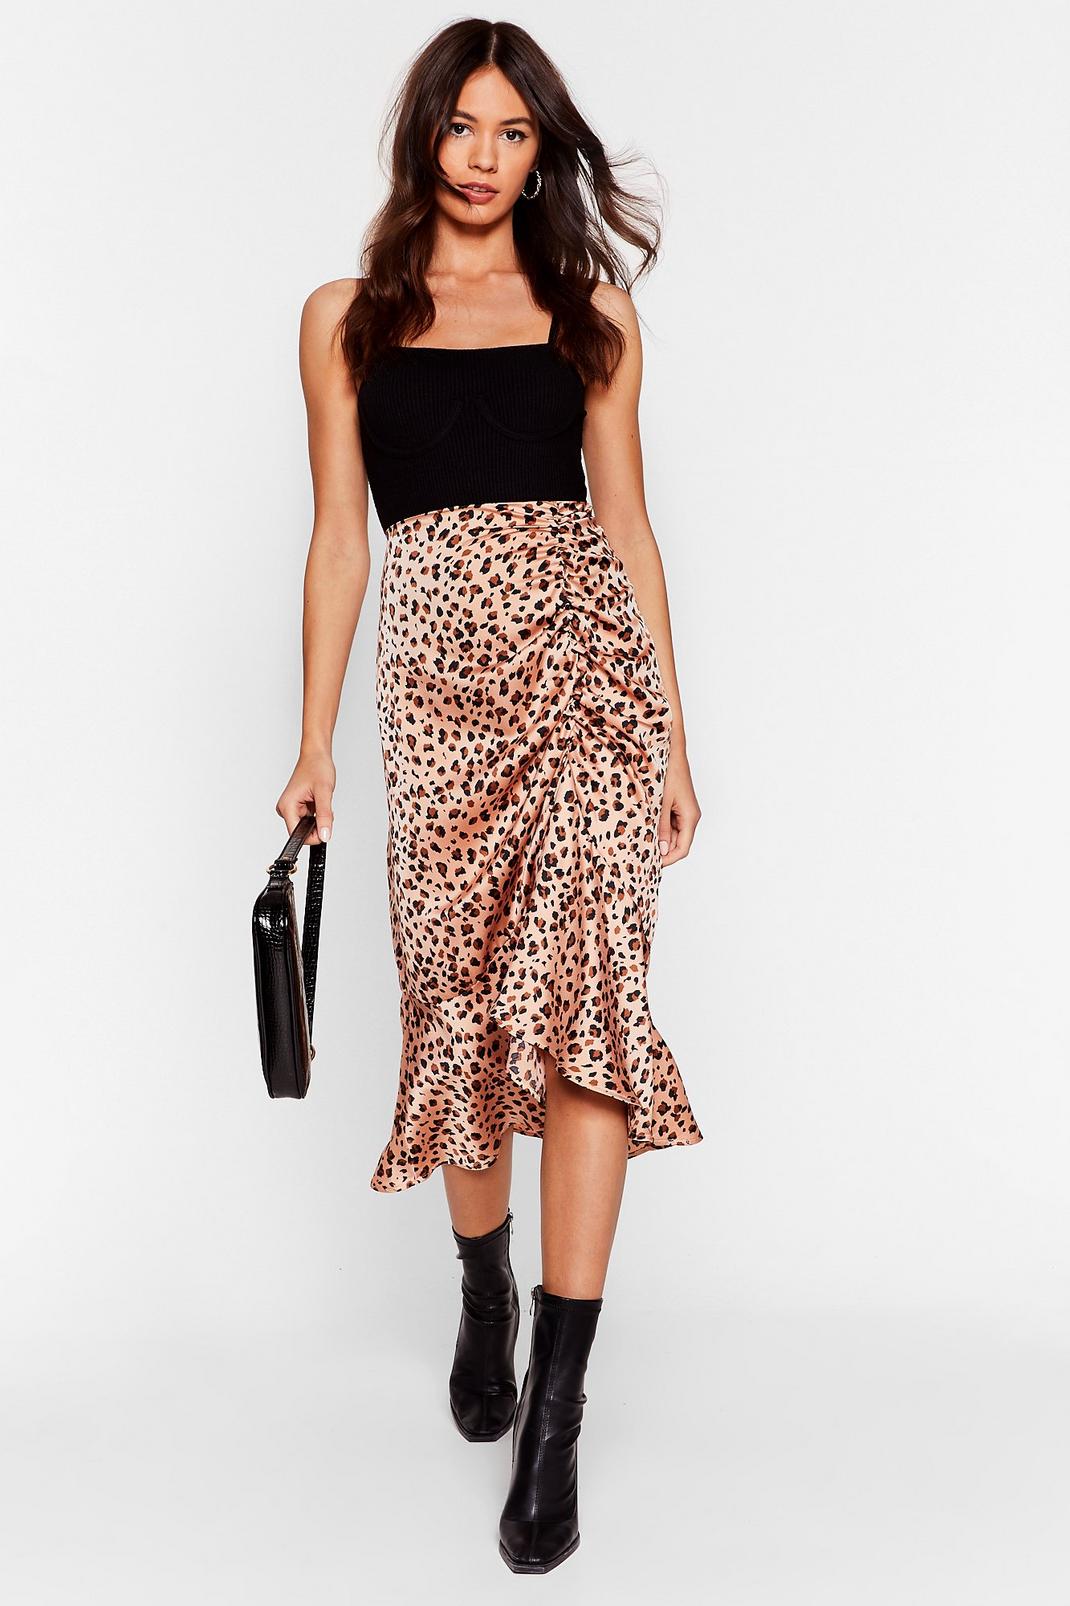 Meow Does She Do It Leopard Midi Skirt image number 1